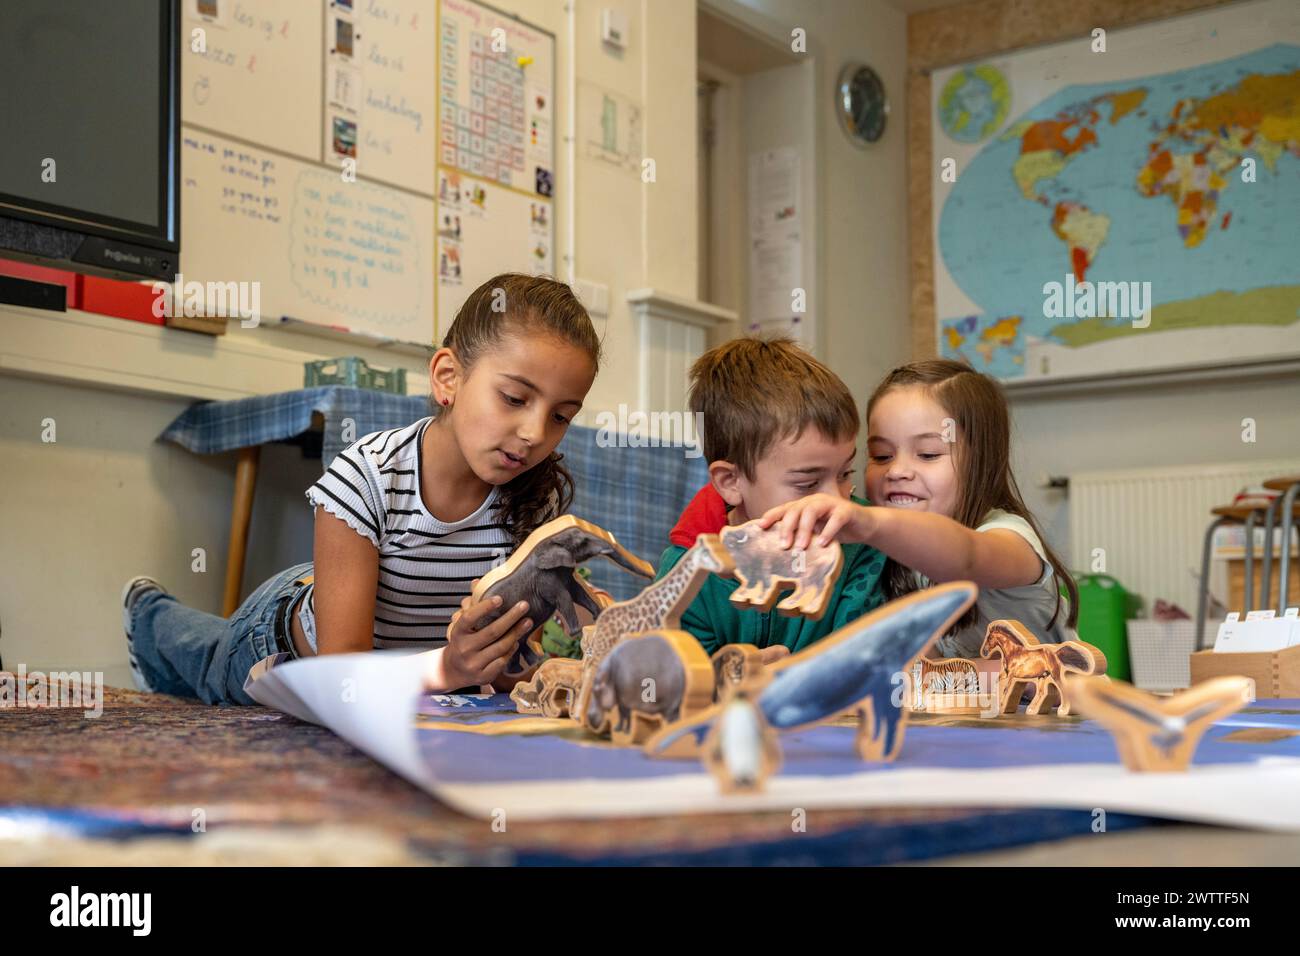 Three children are lying on the floor, engaging with various dinosaur toy models spread out on a carpet, with a world map in the background. Stock Photo